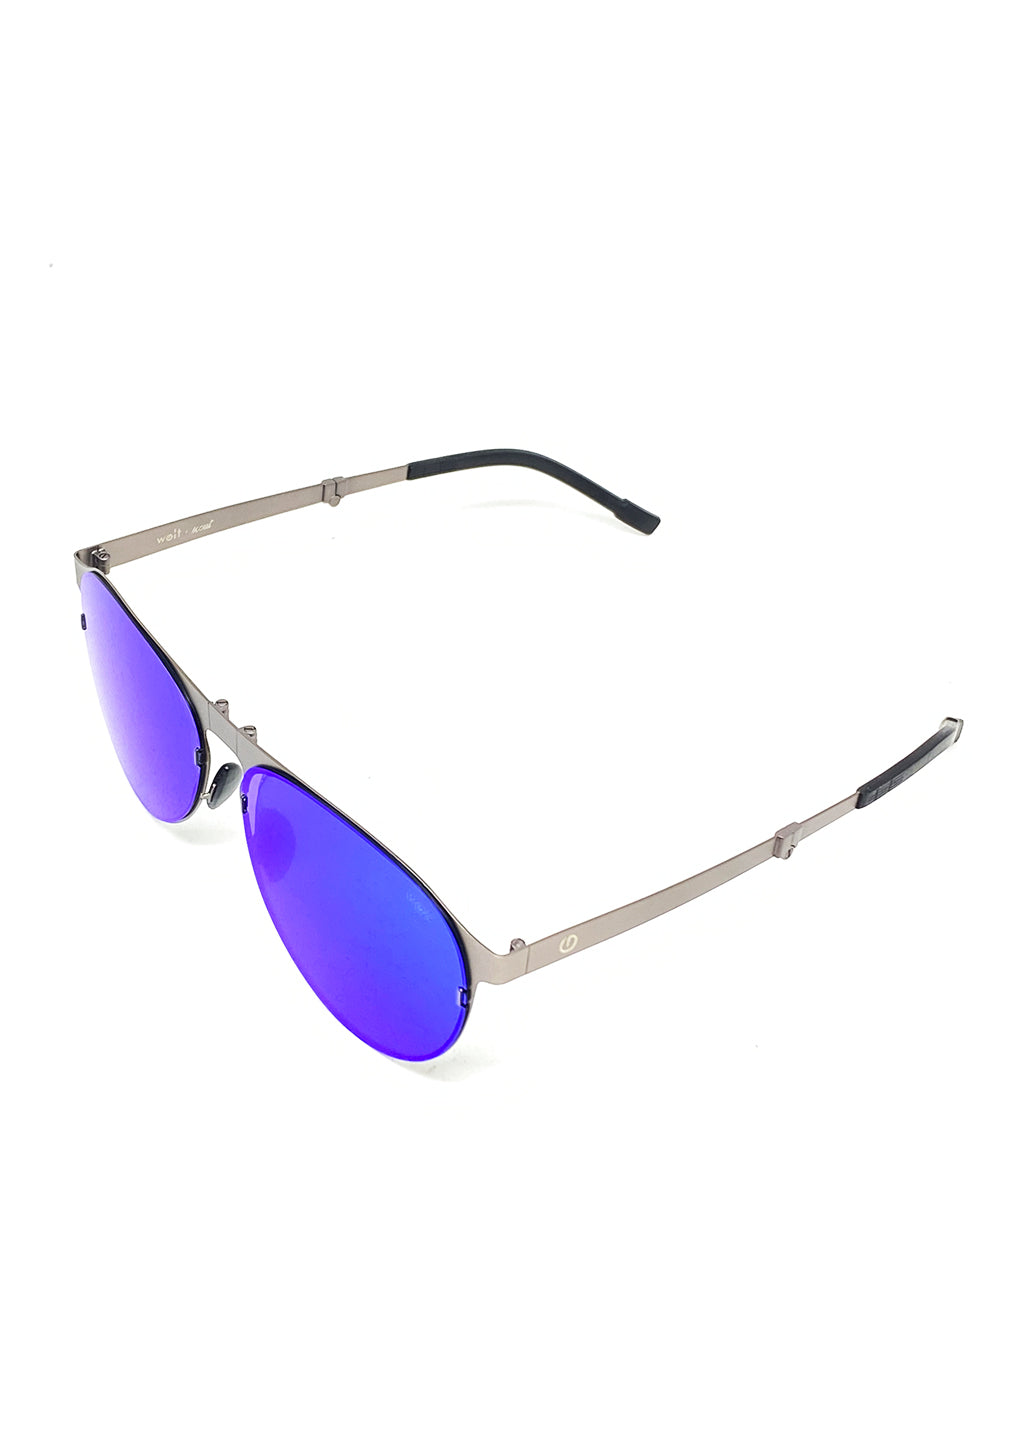 Foldable sunglasses - Scout classic aviator design - Above from the side.